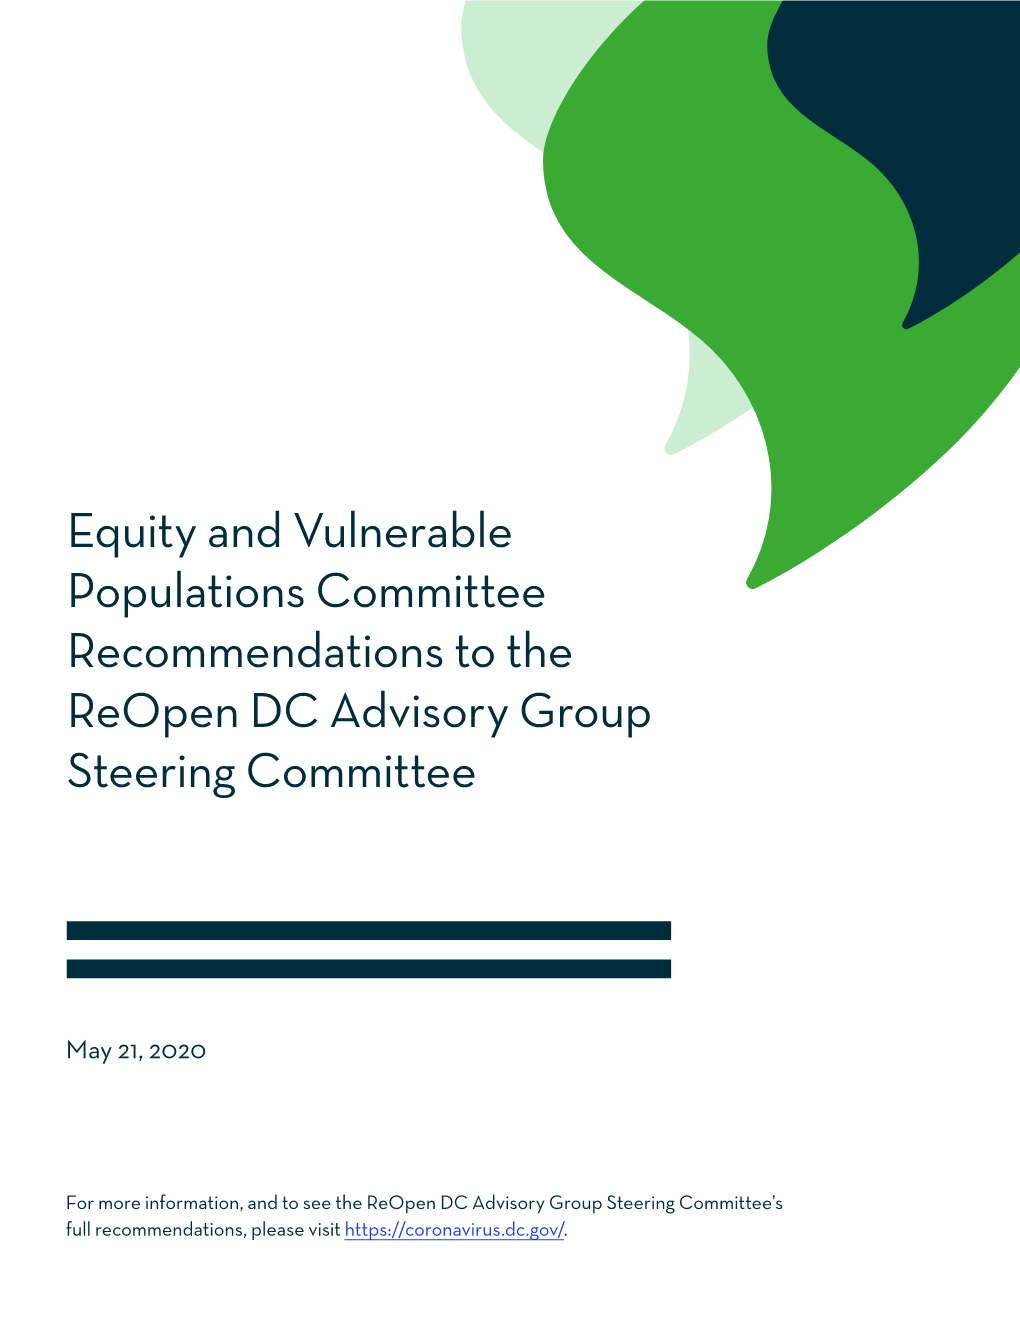 Equity and Vulnerable Populations Committee Recommendations to the Reopen DC Advisory Group Steering Committee